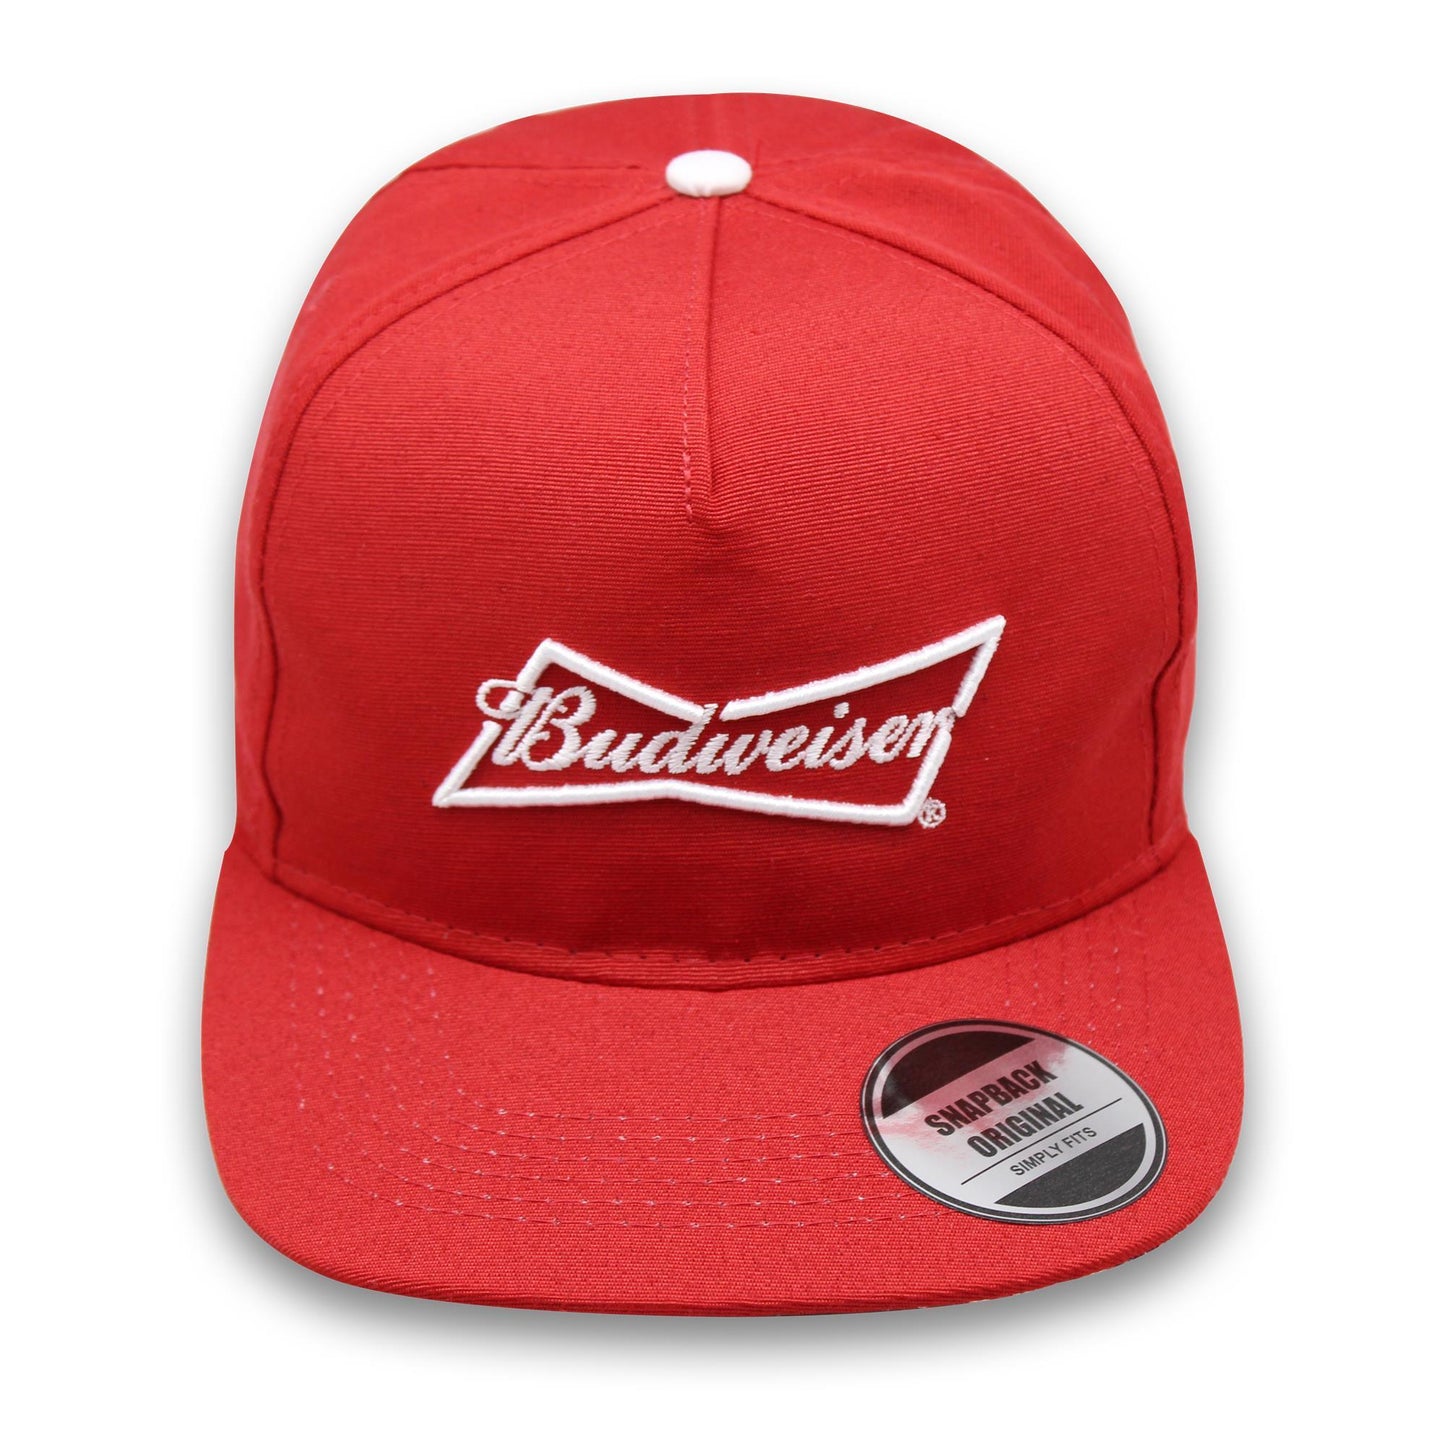 BUDSFP Budweiser Red Econo Flatbill With 3D/Flat Emb